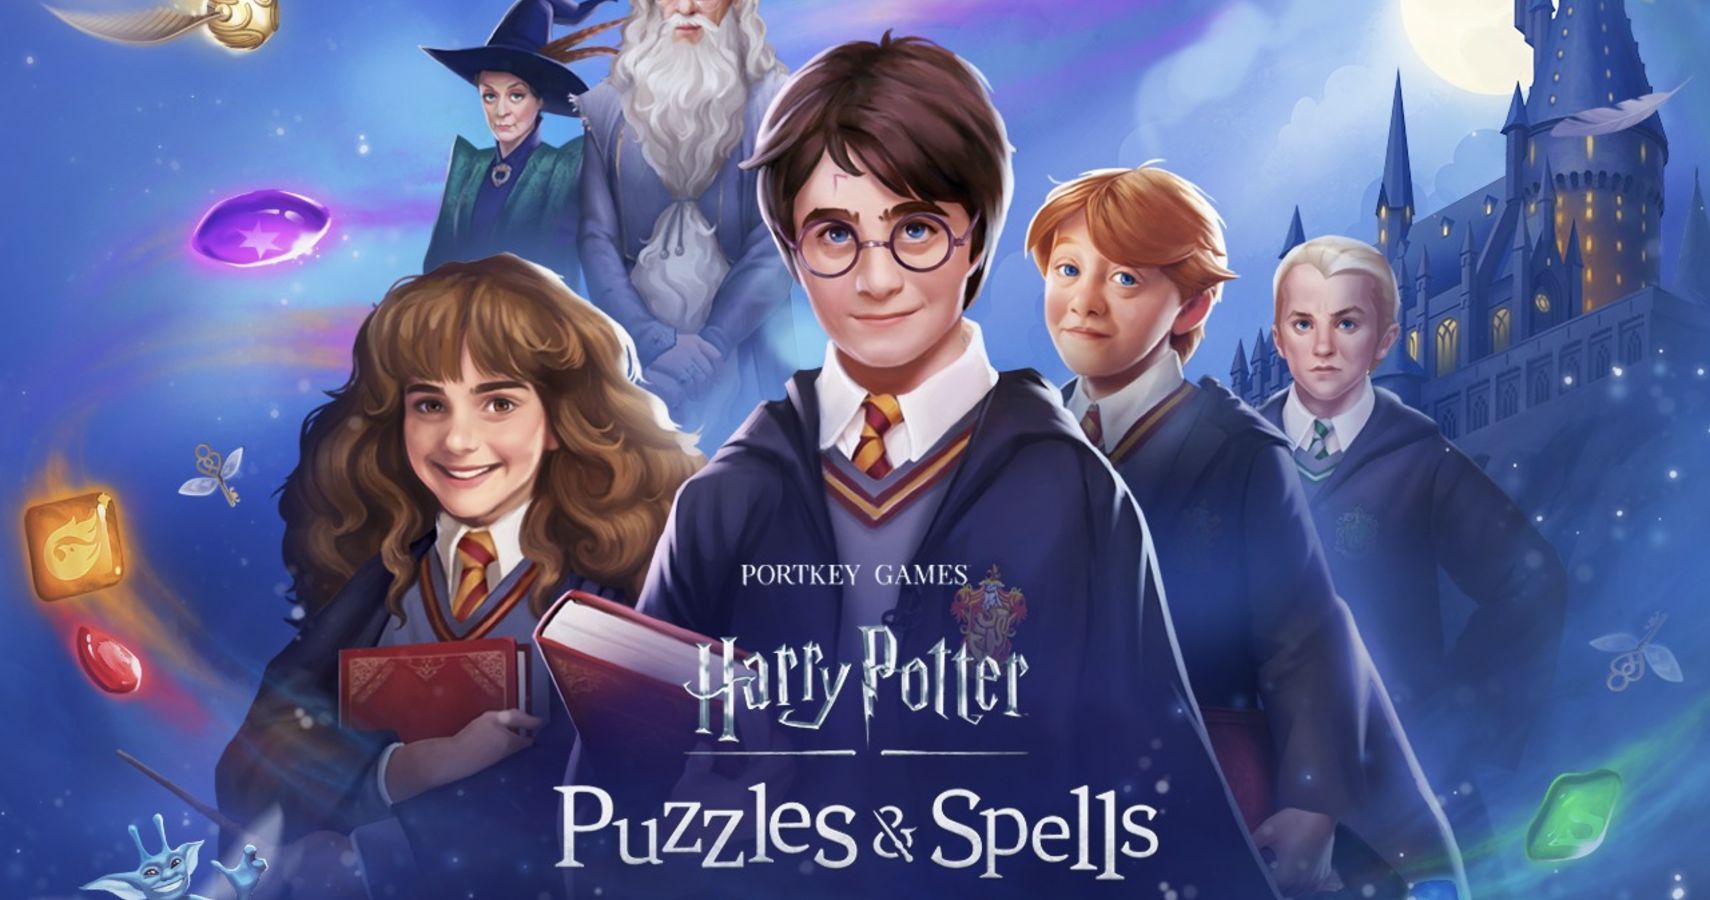 Harry Potter Puzzles & Spells Now Open For PreRegistration